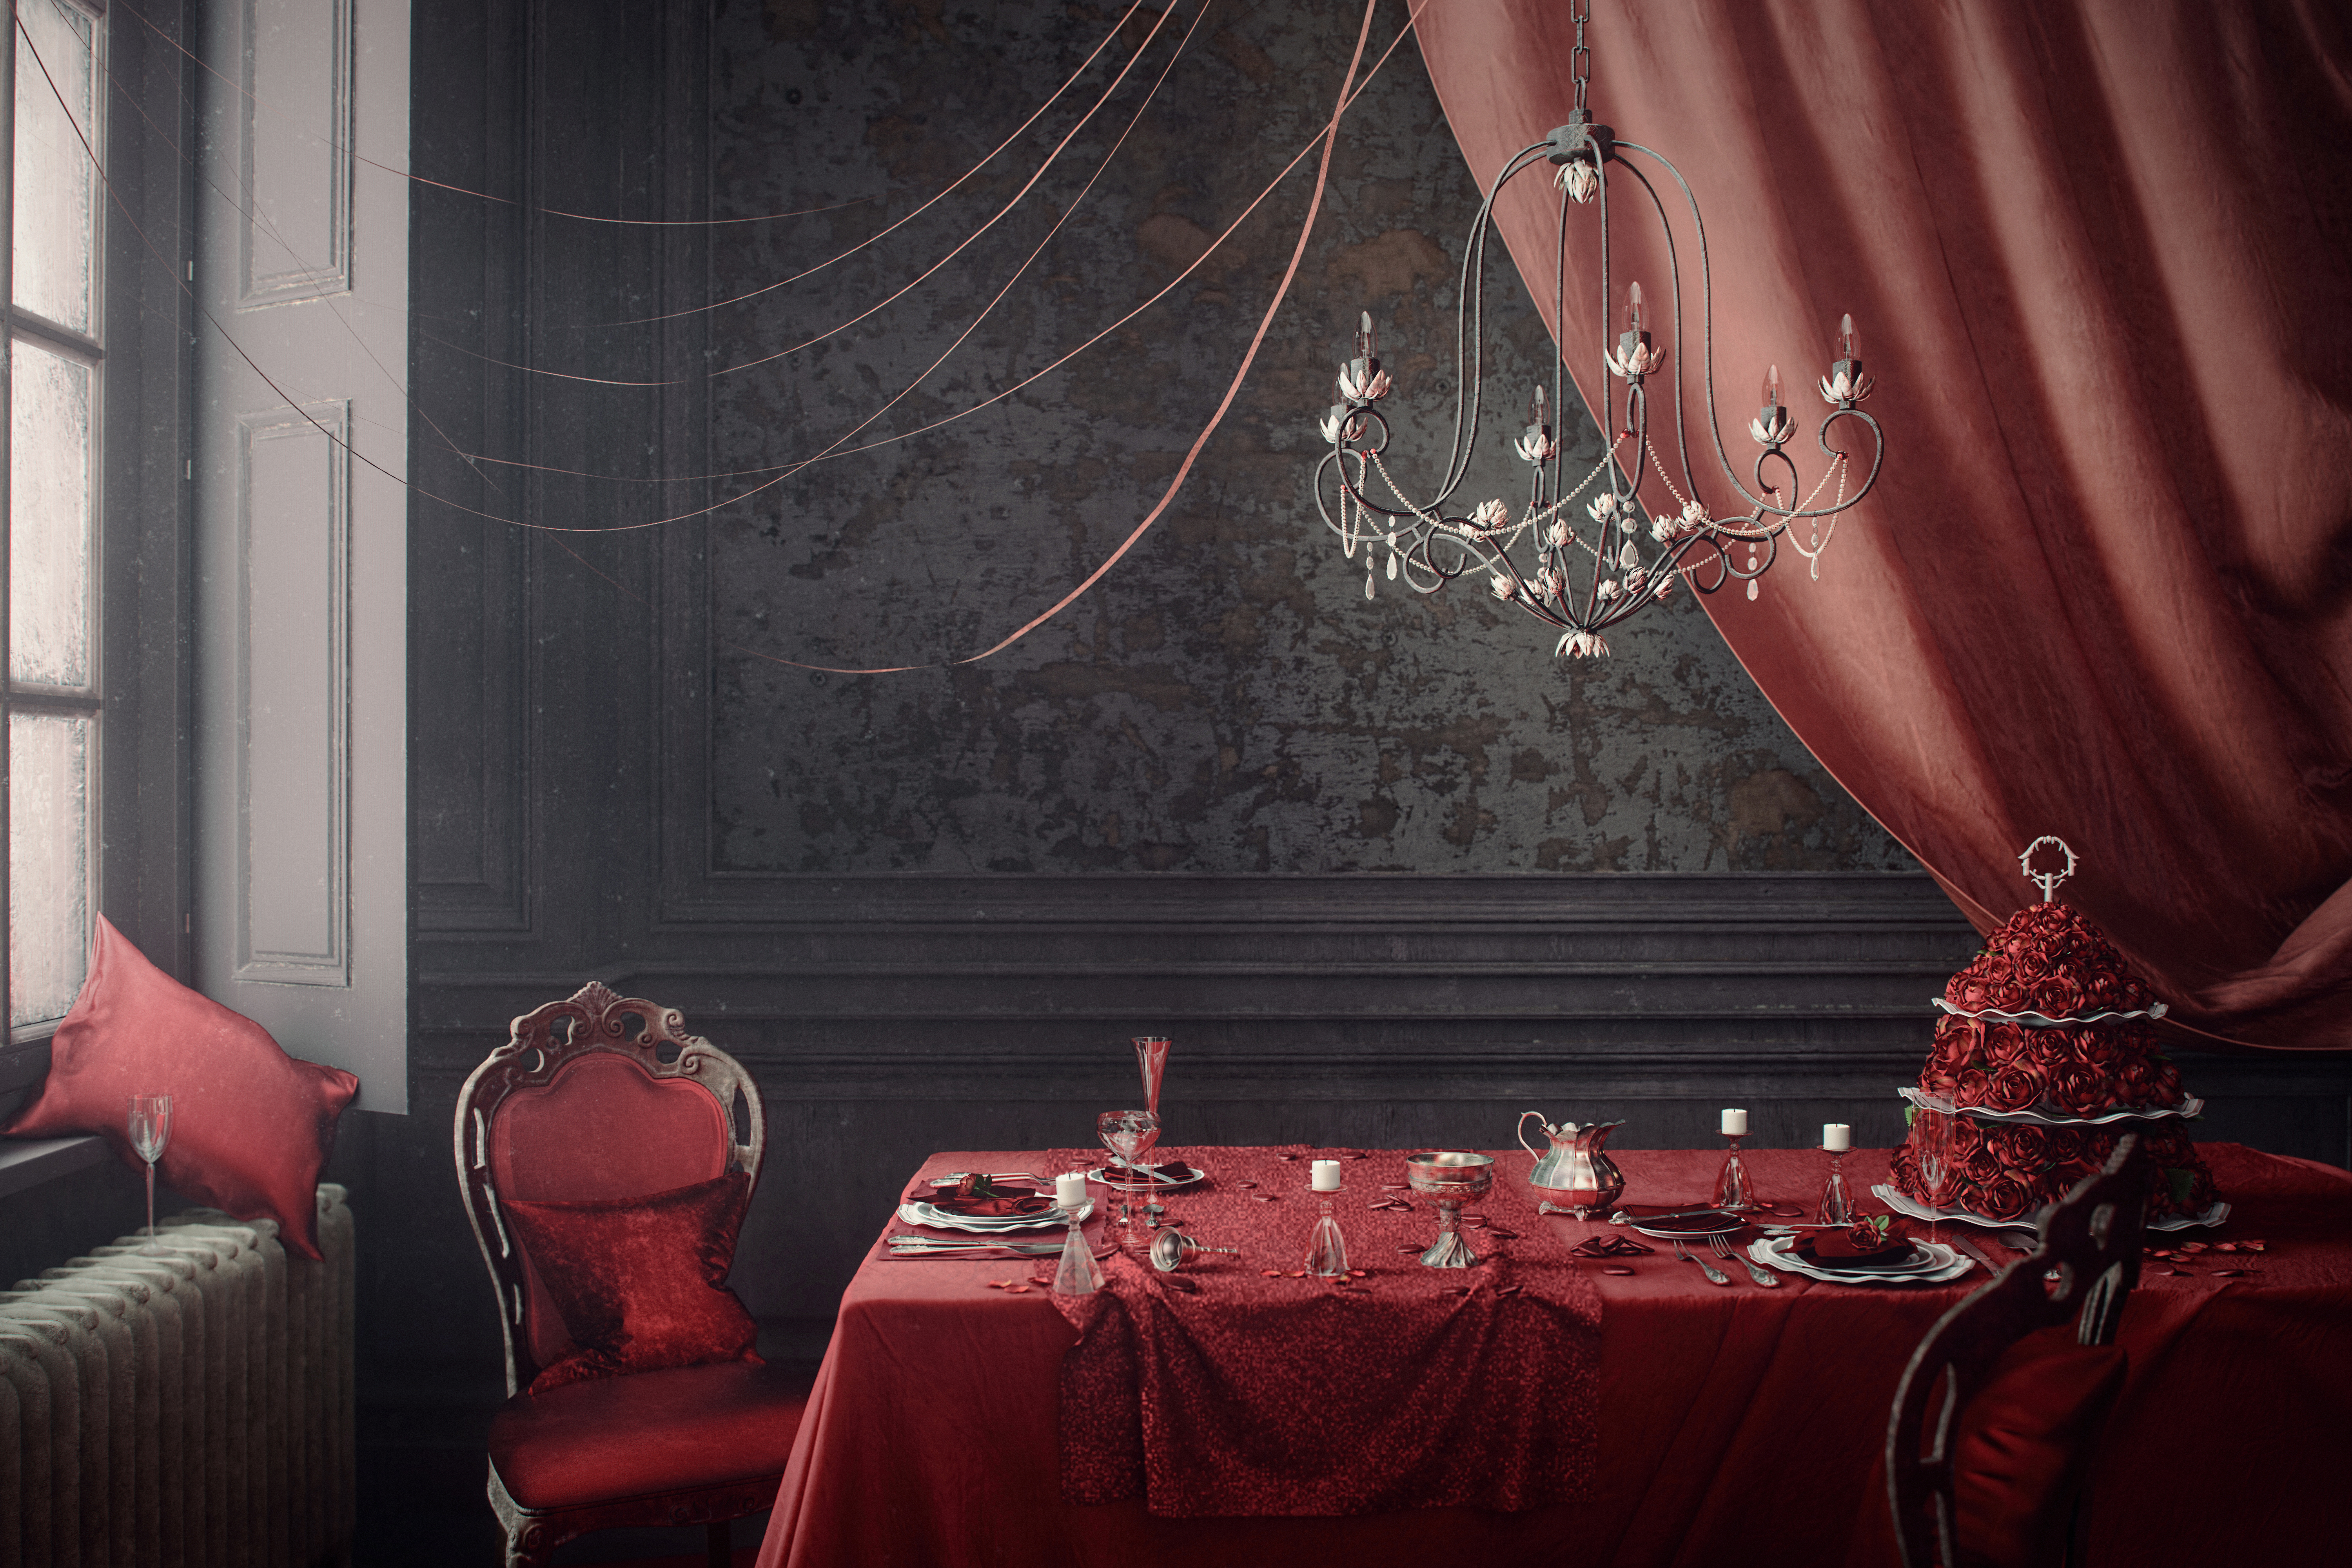 red-dining-room